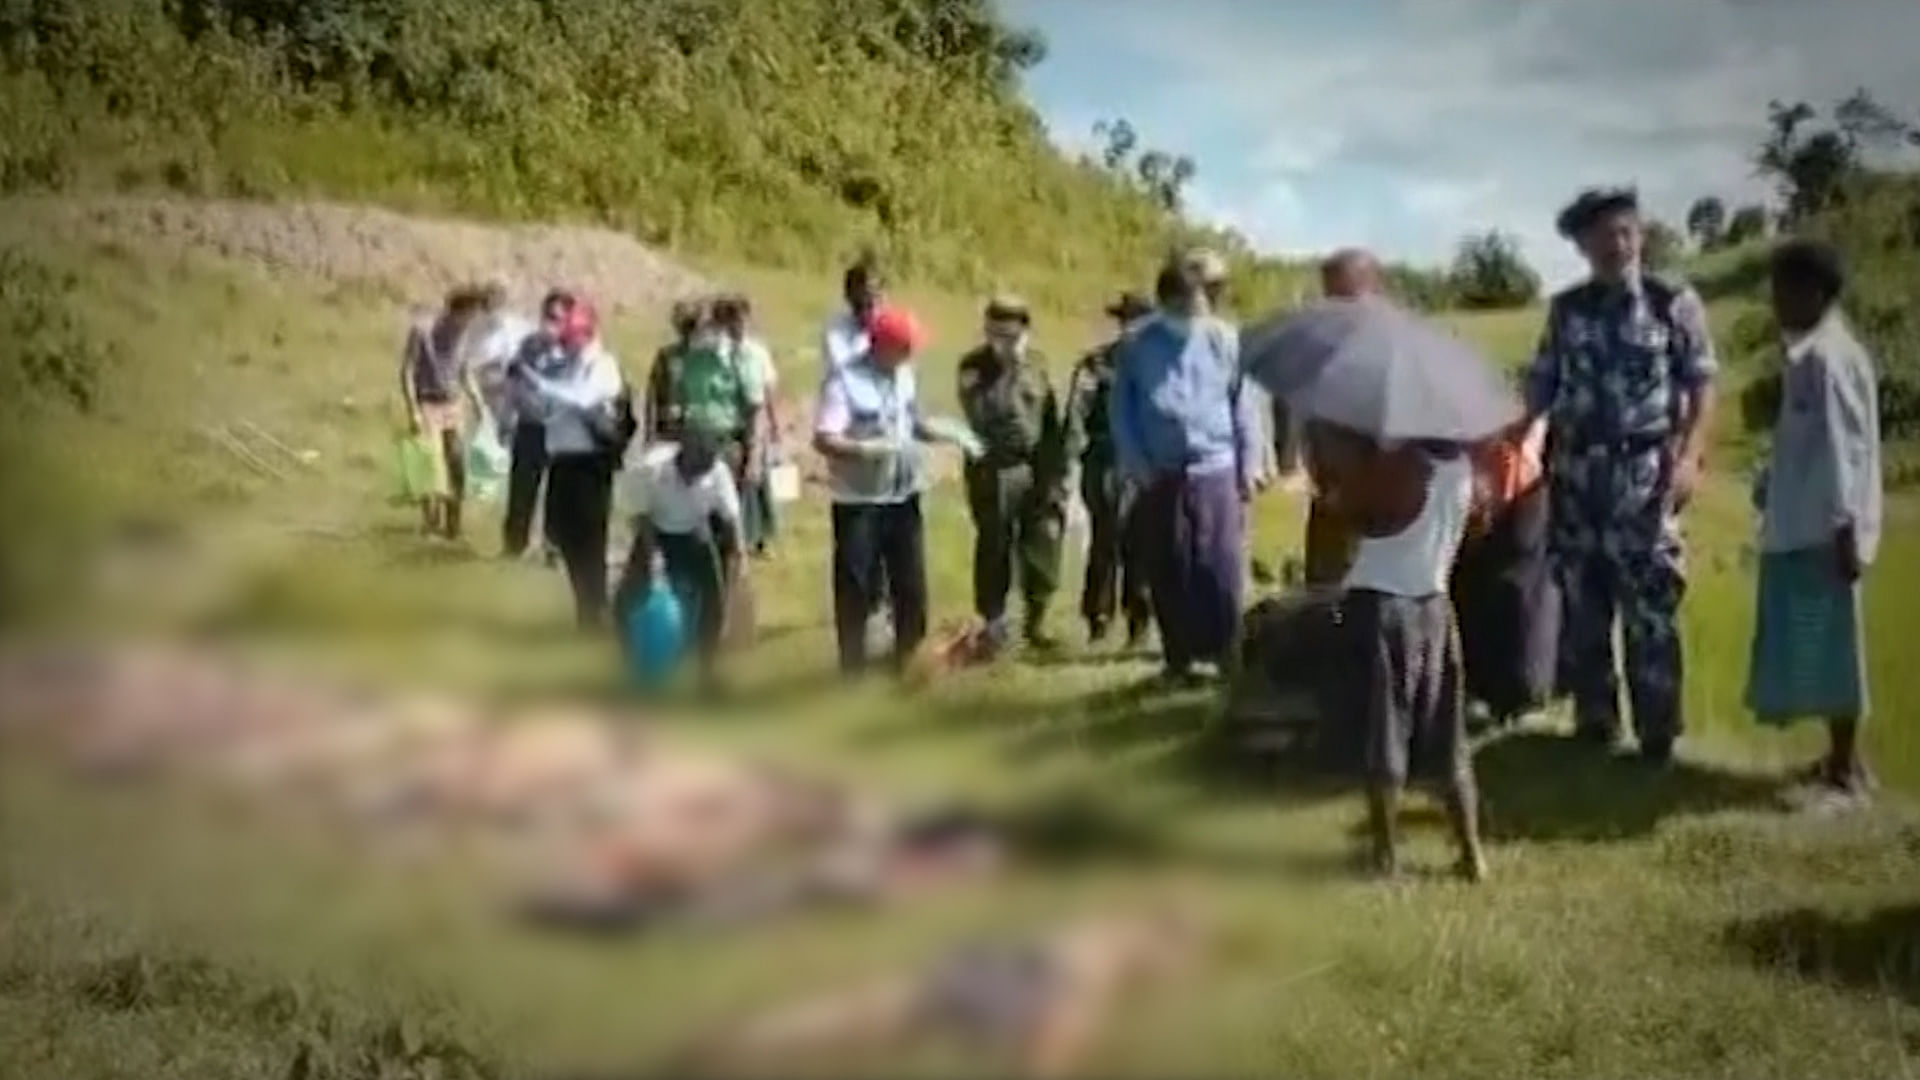 Police blame the Arakan Rohingya Salvation Army insurgent group, or ARSA for these killings.